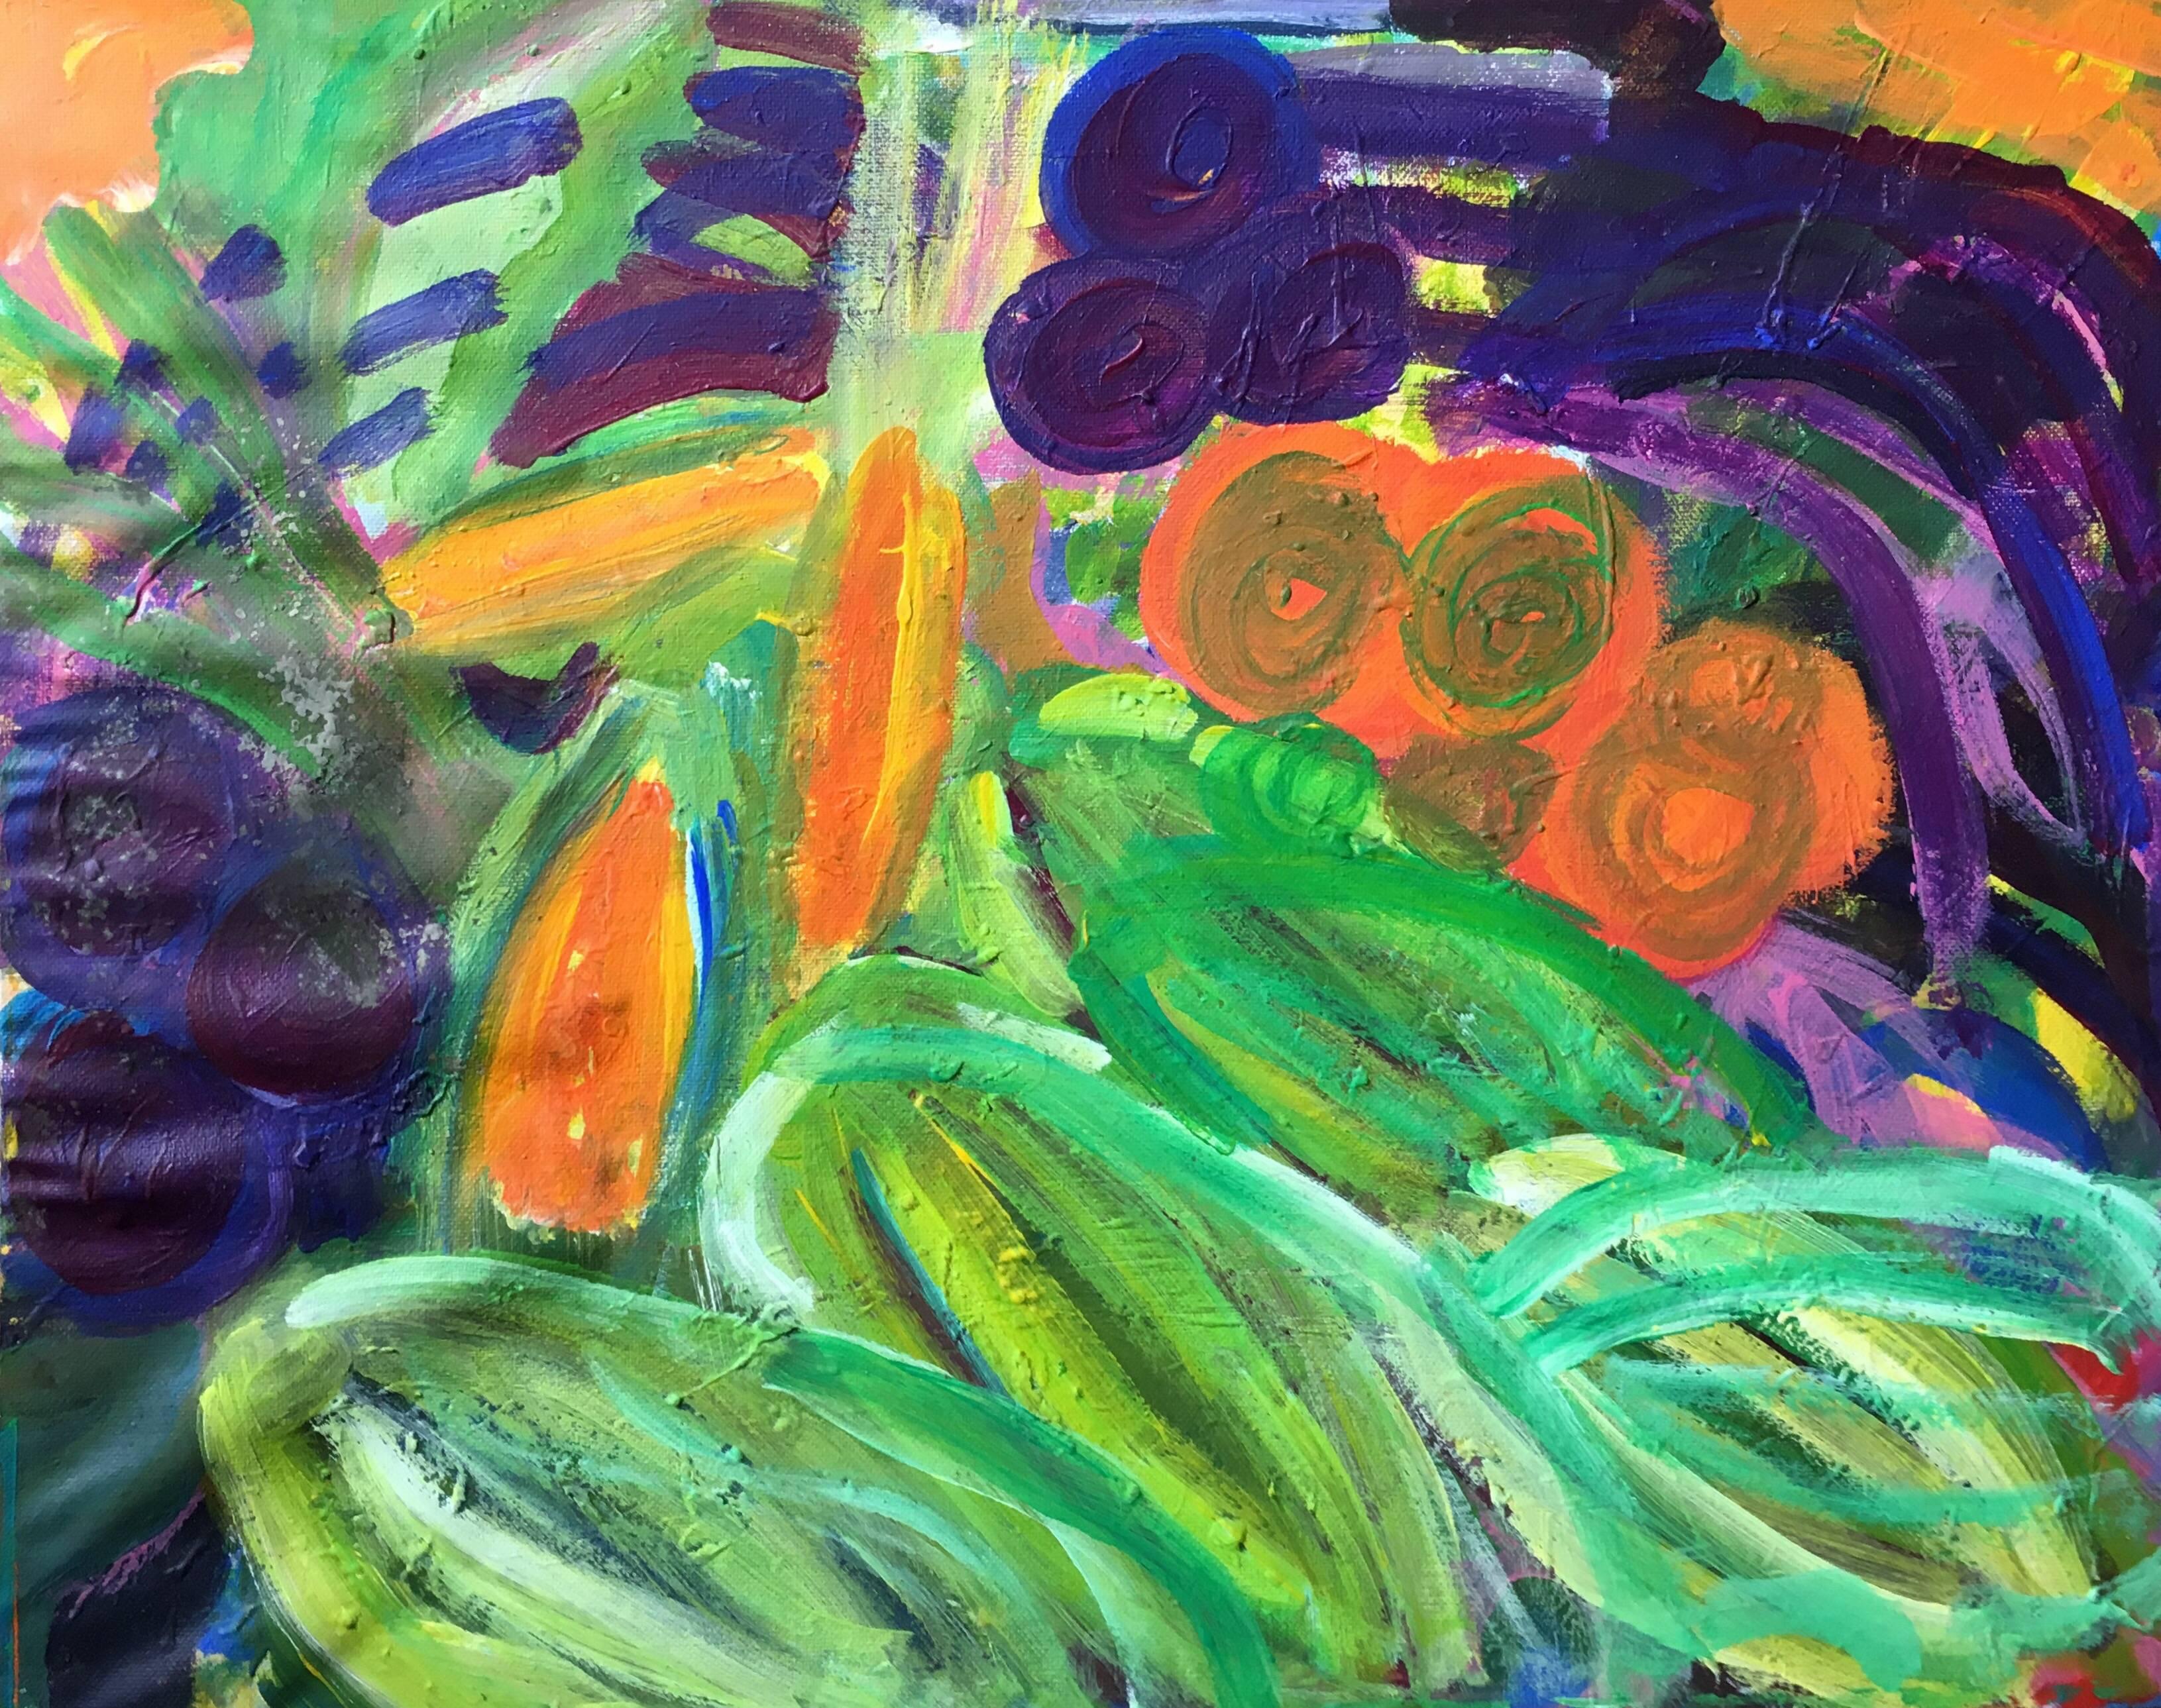 Abstract Colourful Vegetables, Oil Painting